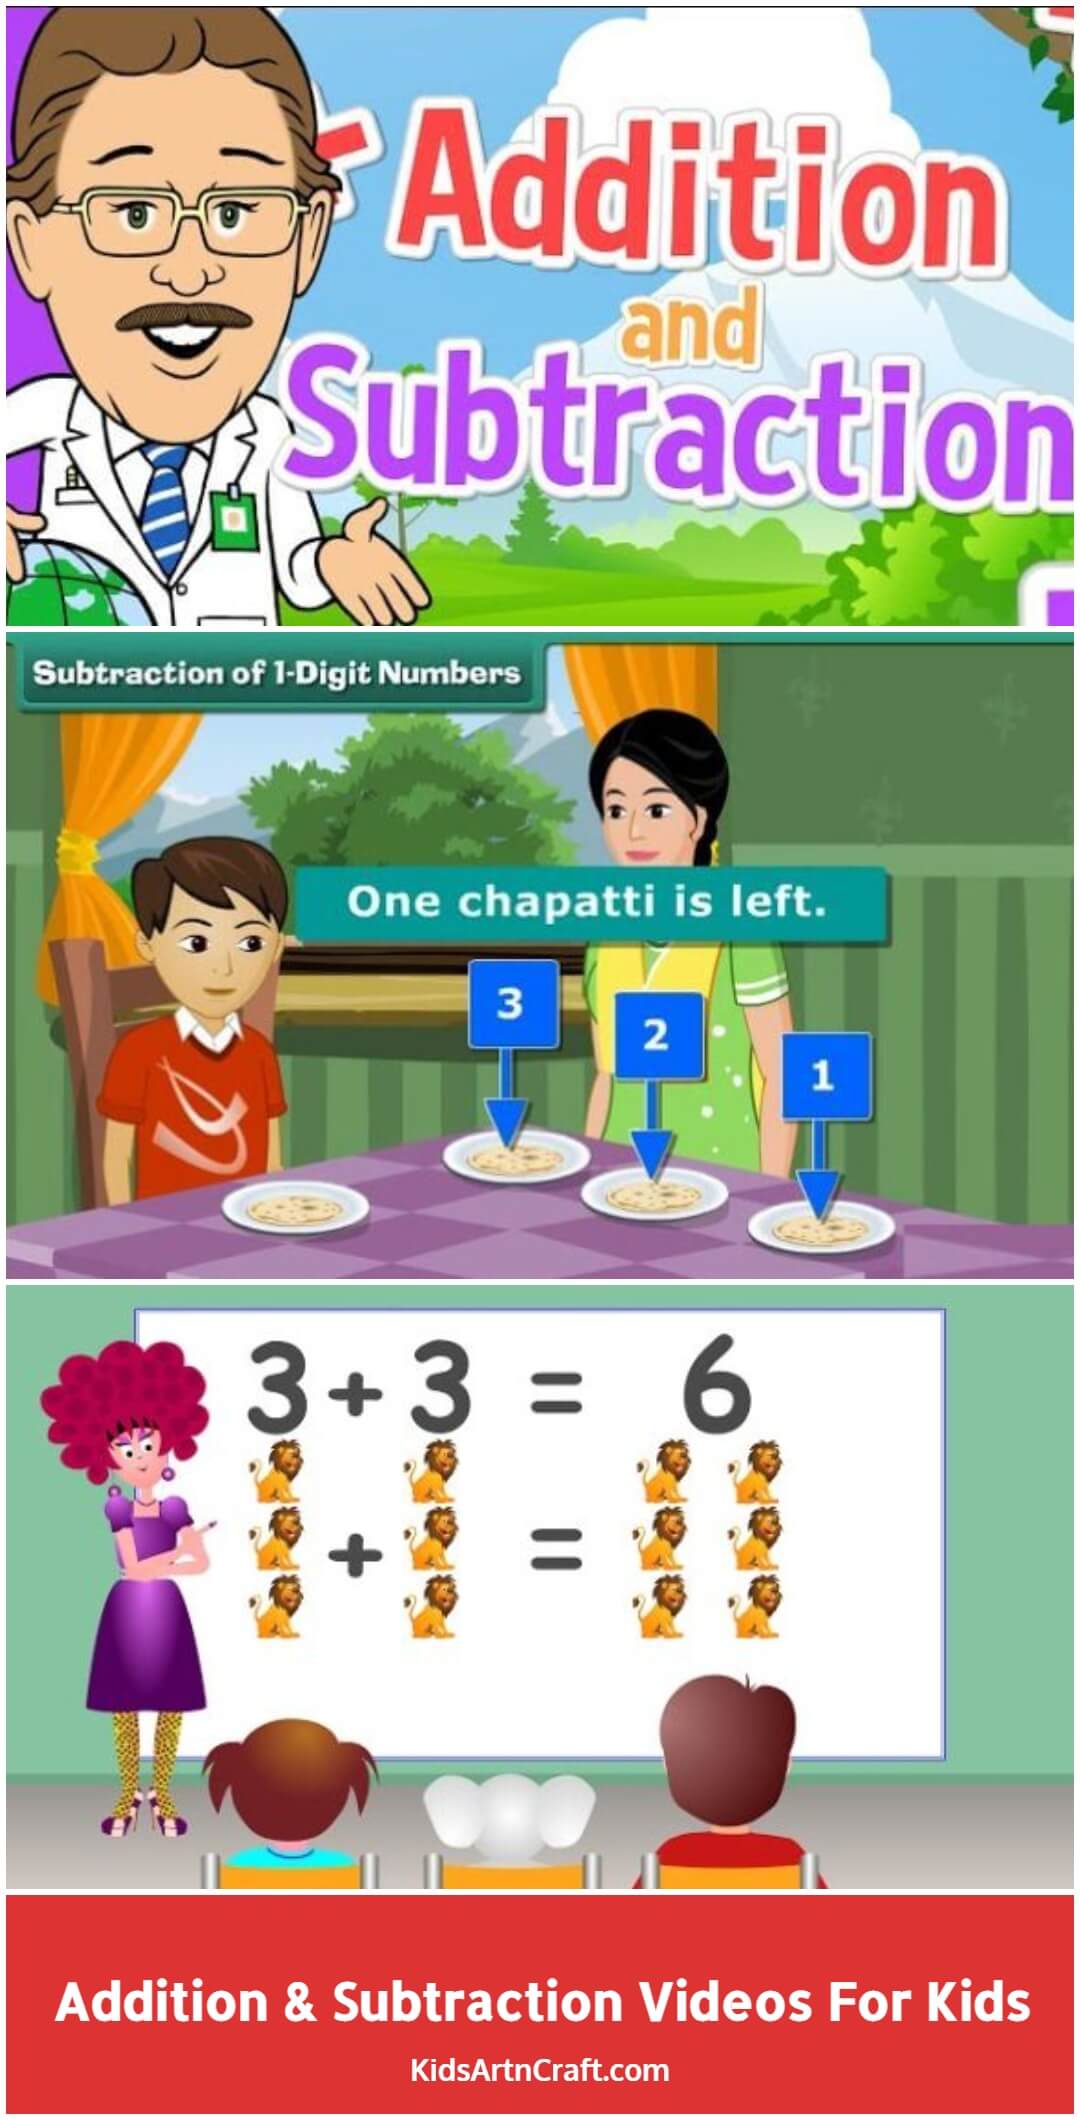 Addition & Subtraction Videos For Kids